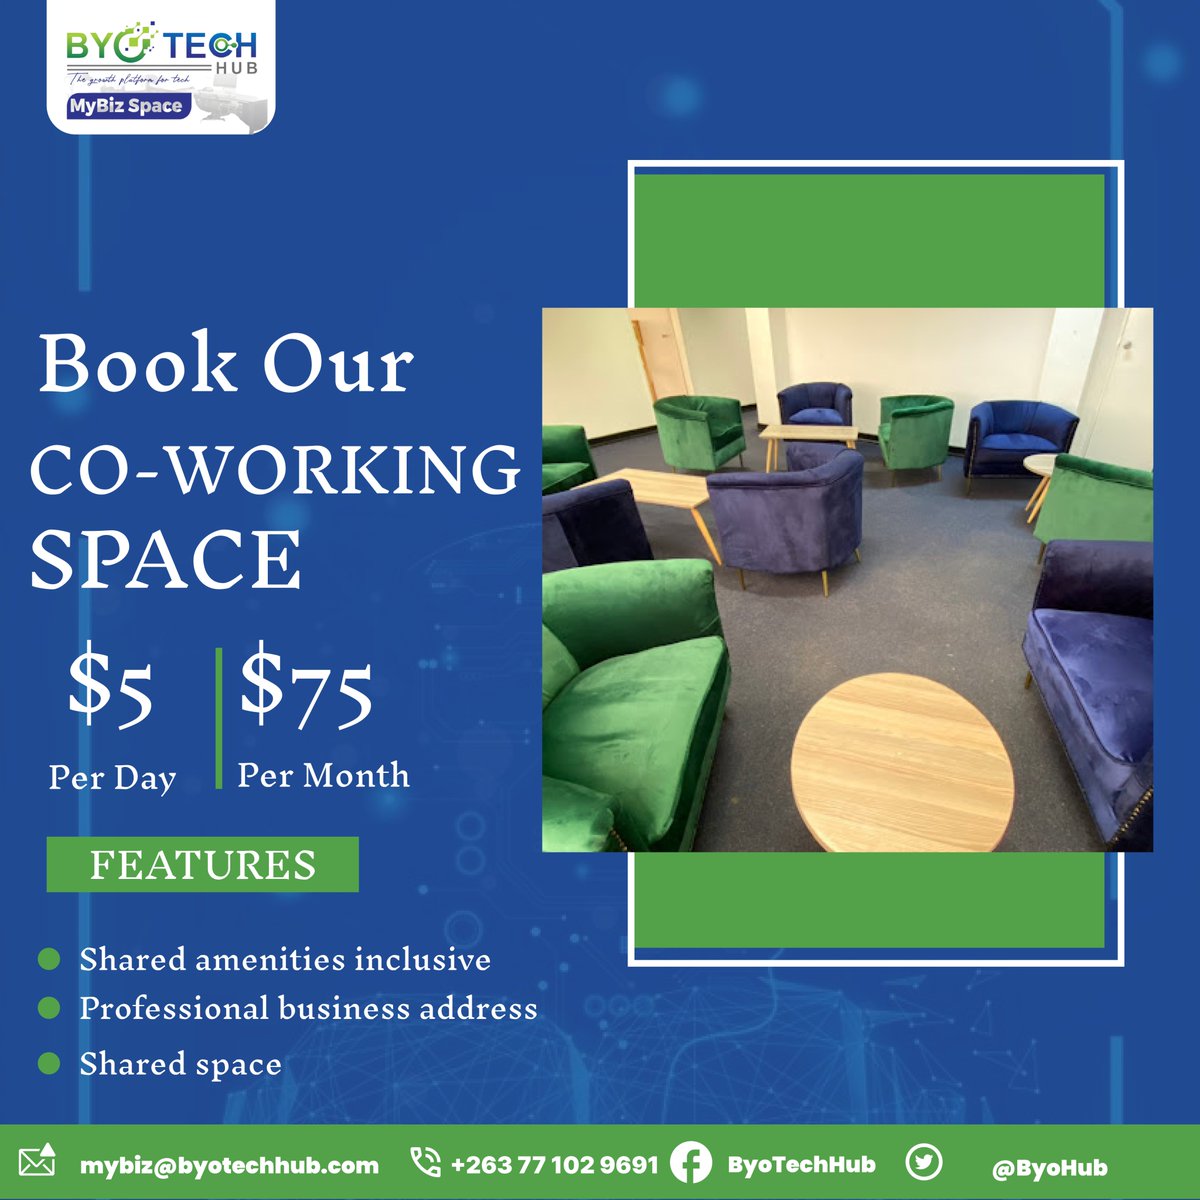 Are you a businessman or woman, looking for a comfortable workspace and a way to cut down your overhead cost? Book our co-working space for as low as $5 per day and $75 per month. Features ✅ Shared amenities inclusive ✅ Professional business address ✅ Shared space